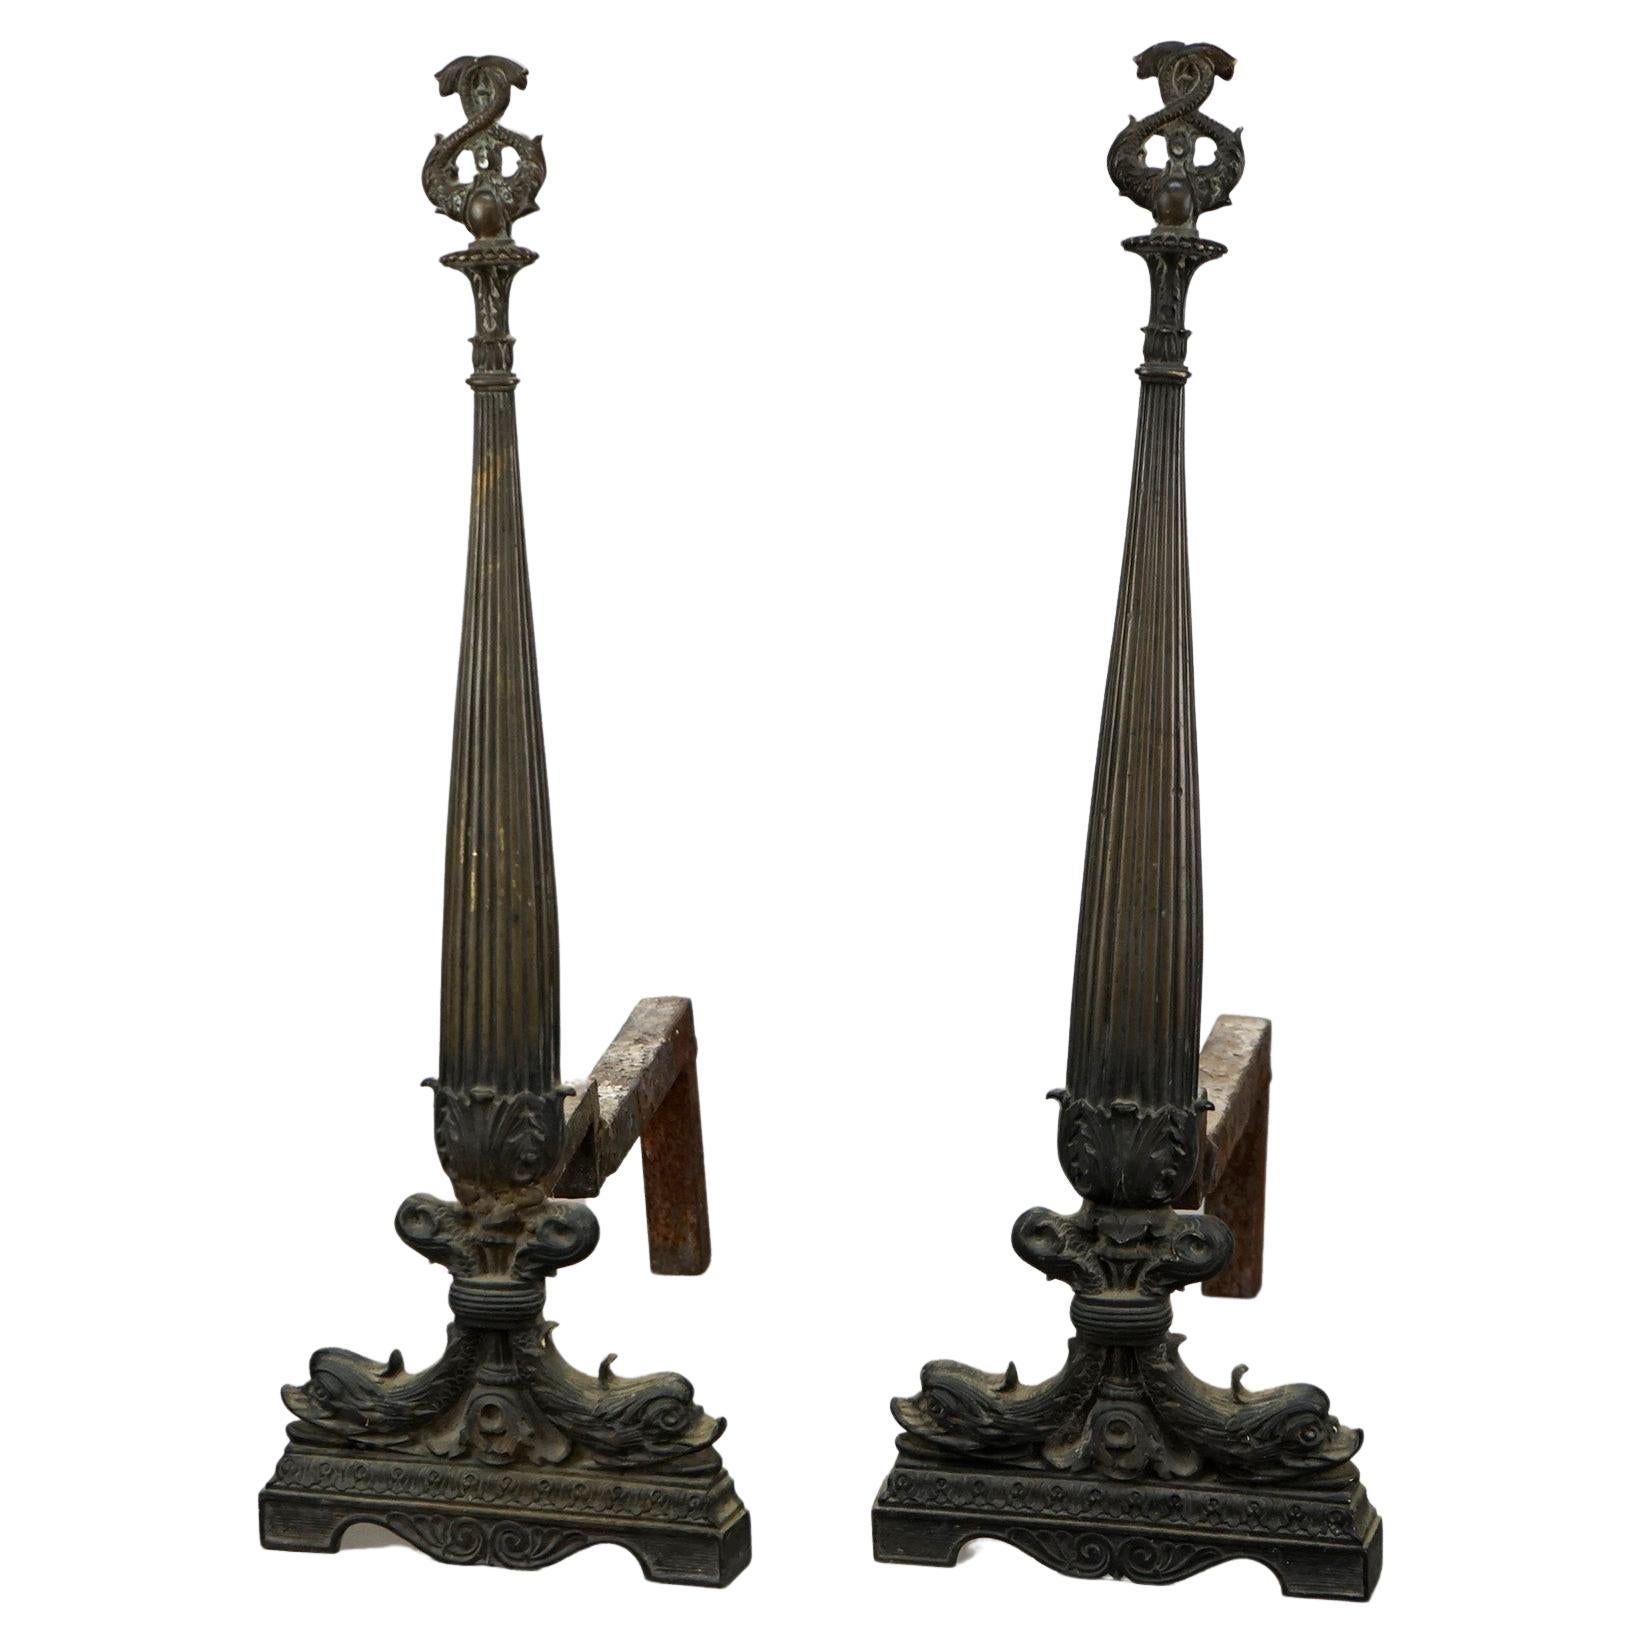 Antique French Second Empire Figural Bronze Andirons with Dolphin Finials 19th C